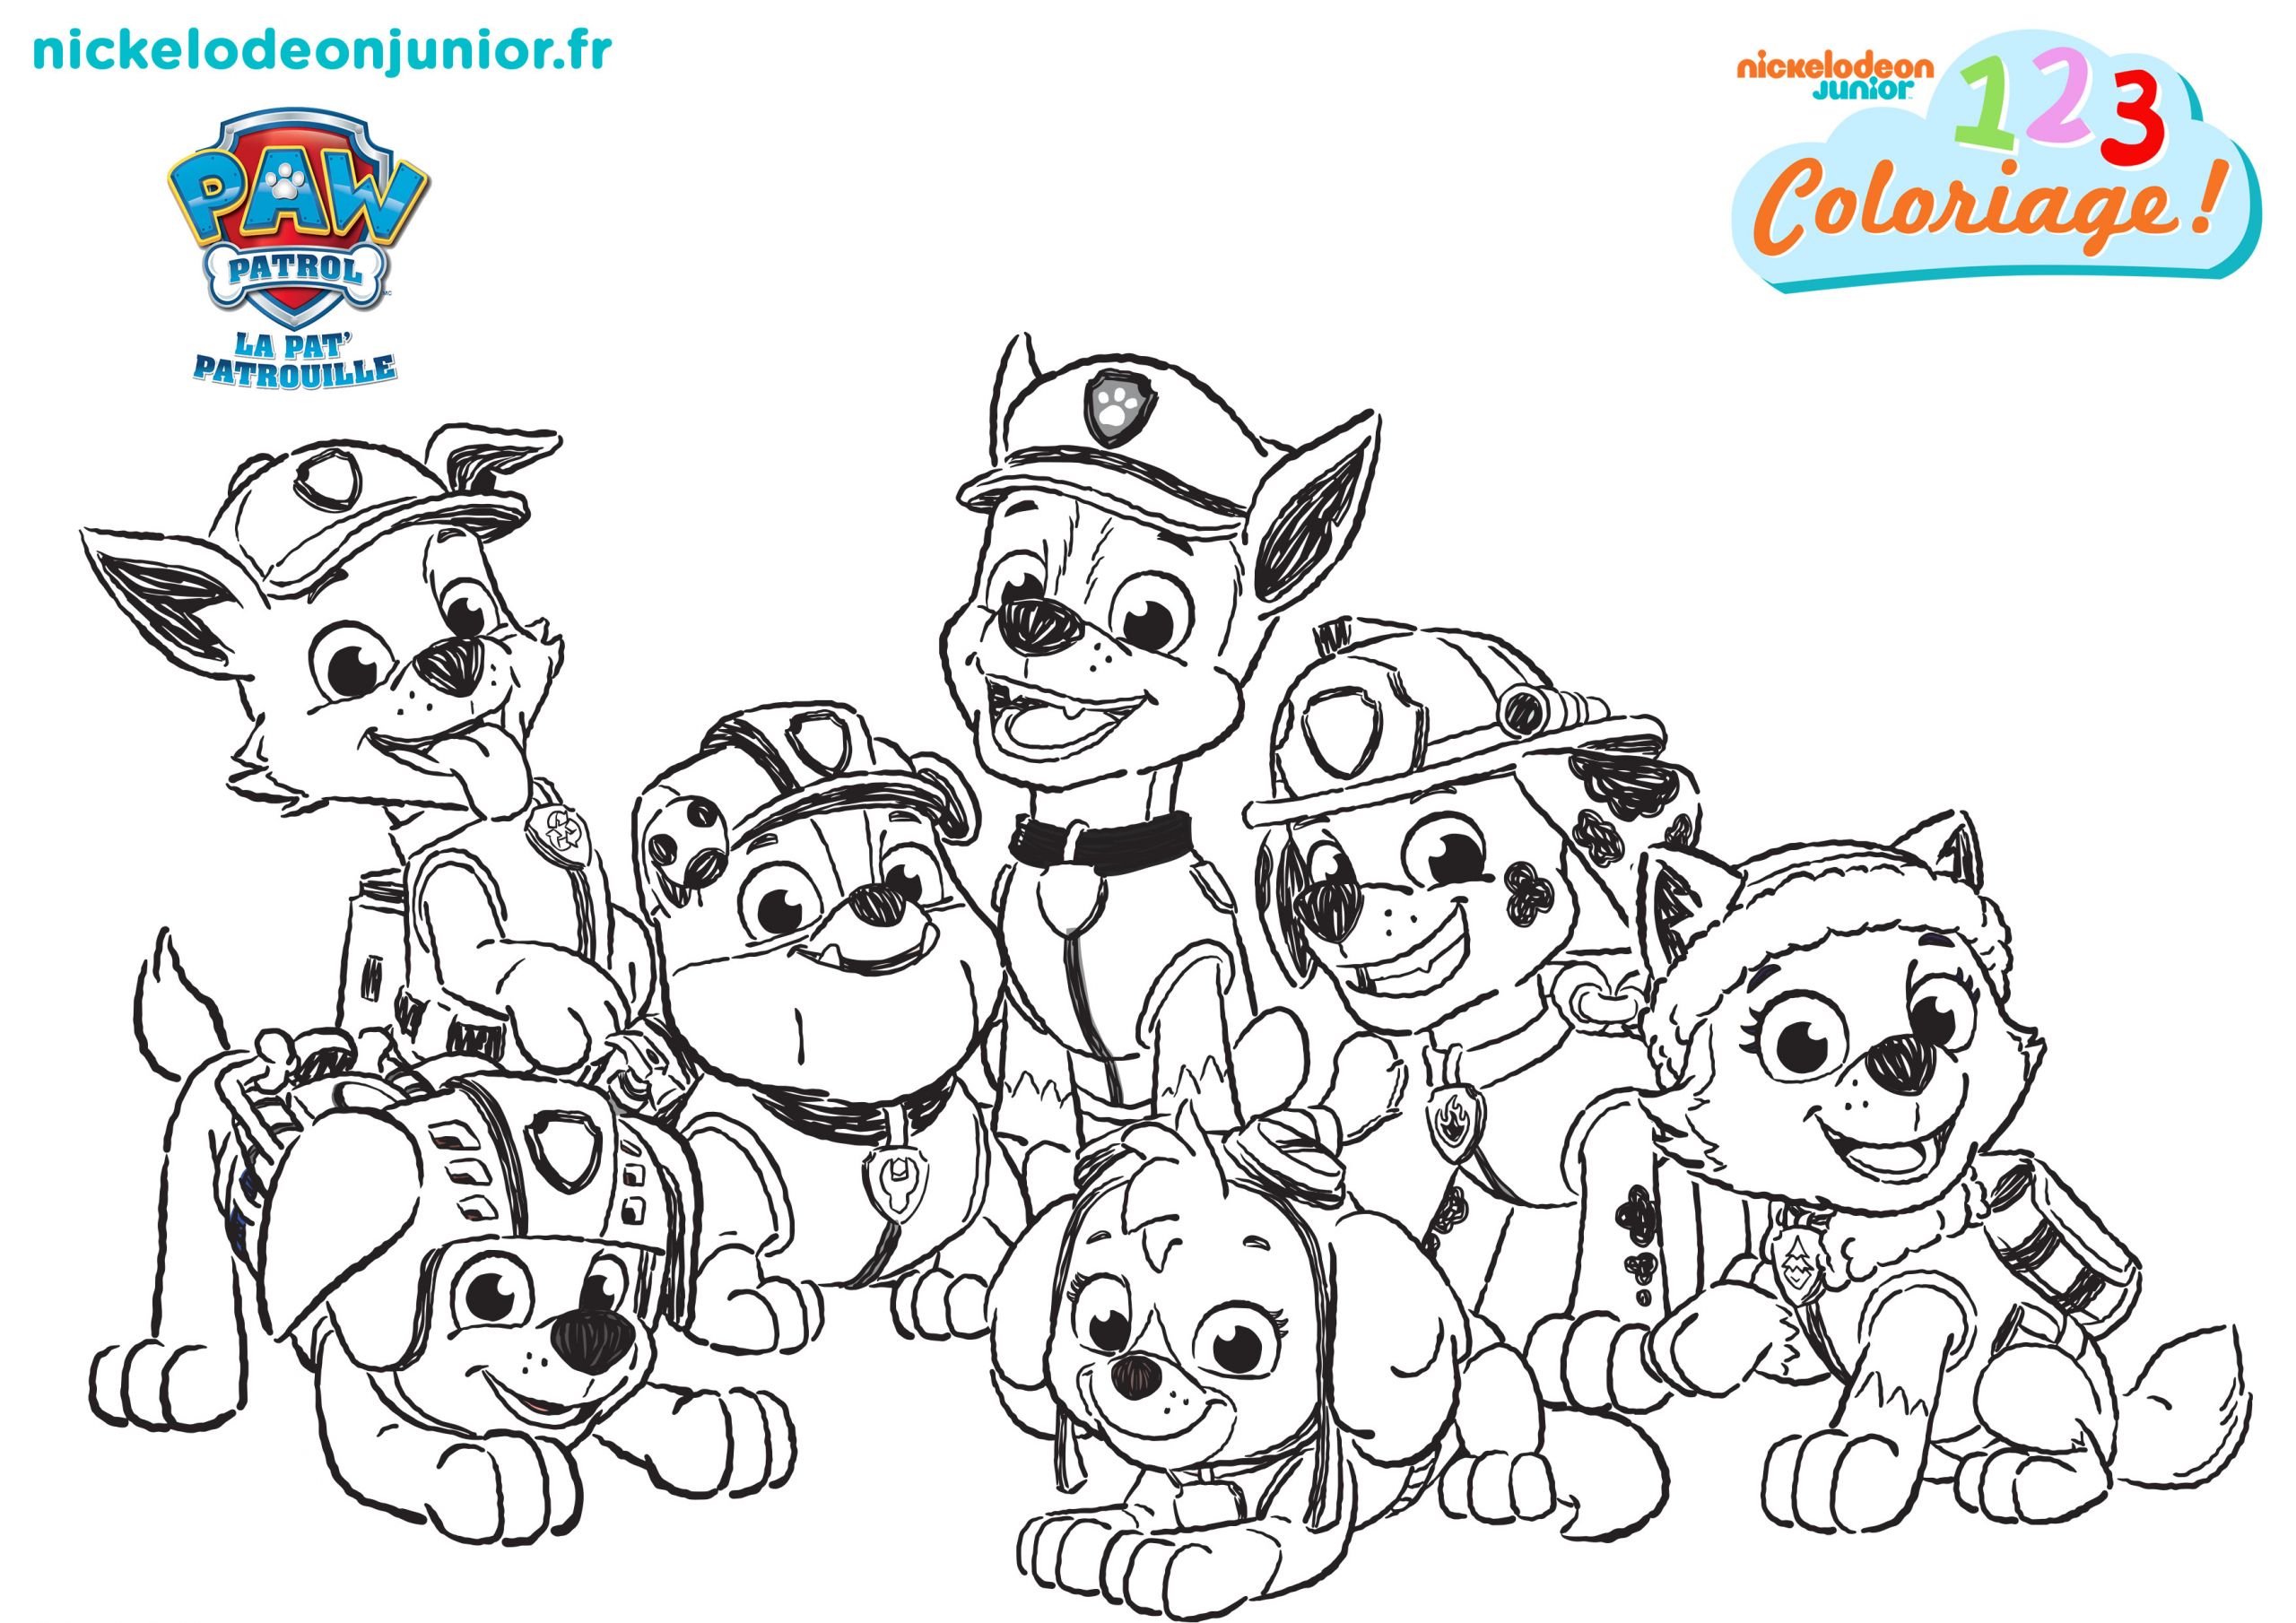 coloriages paw patrol6